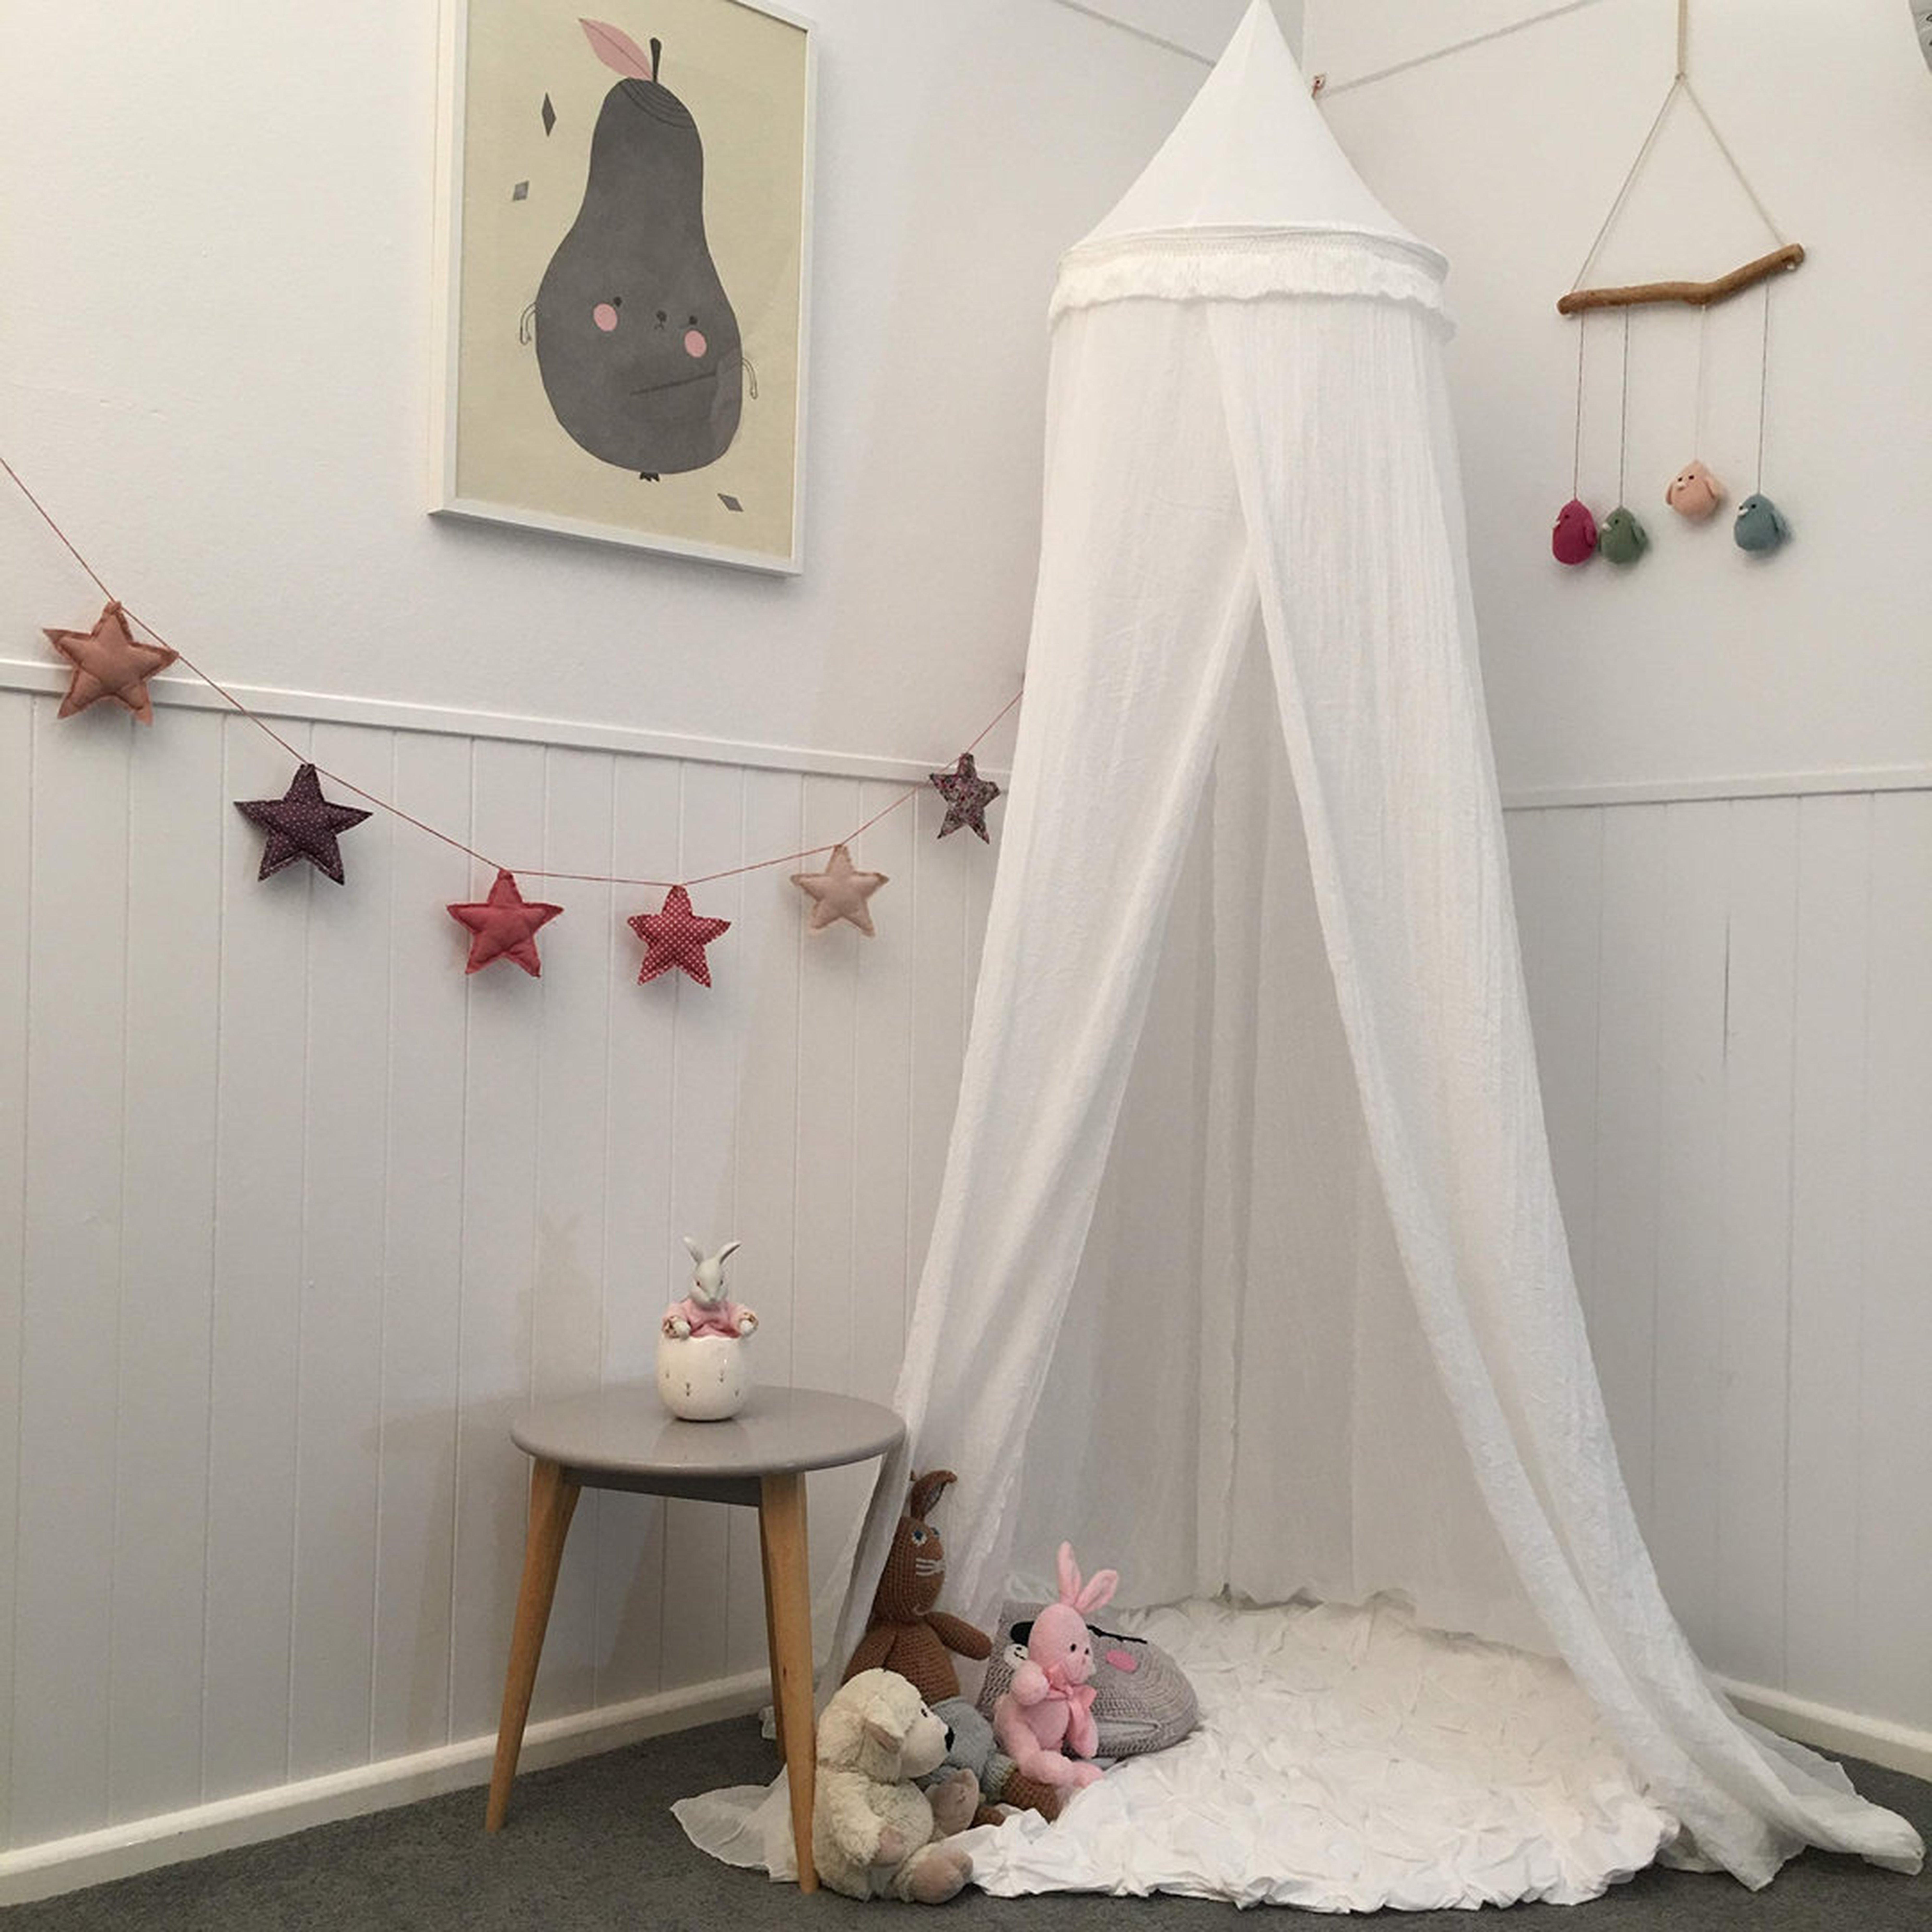 "tarye Soft White Hanging Bed Canopy For Girls Bed Or Boys – Hideaway Tent For Kids Rooms With Tassels – For Child, Play Or Reading Nook" - Perigold